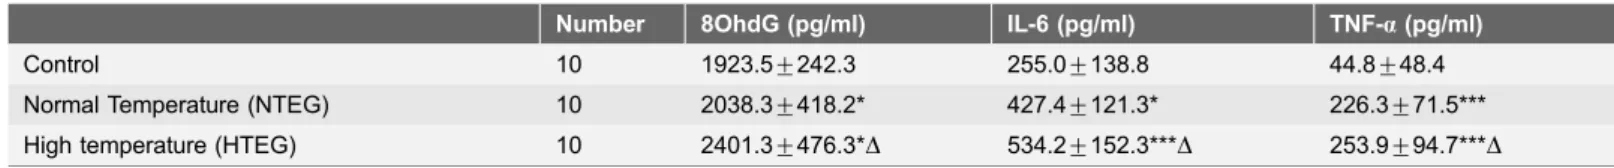 Table 2. Comparison of the changes between groups of 8OhdG in the liver tissue, and serum inflammation factors (IL-6, TNF-a) in the rat.